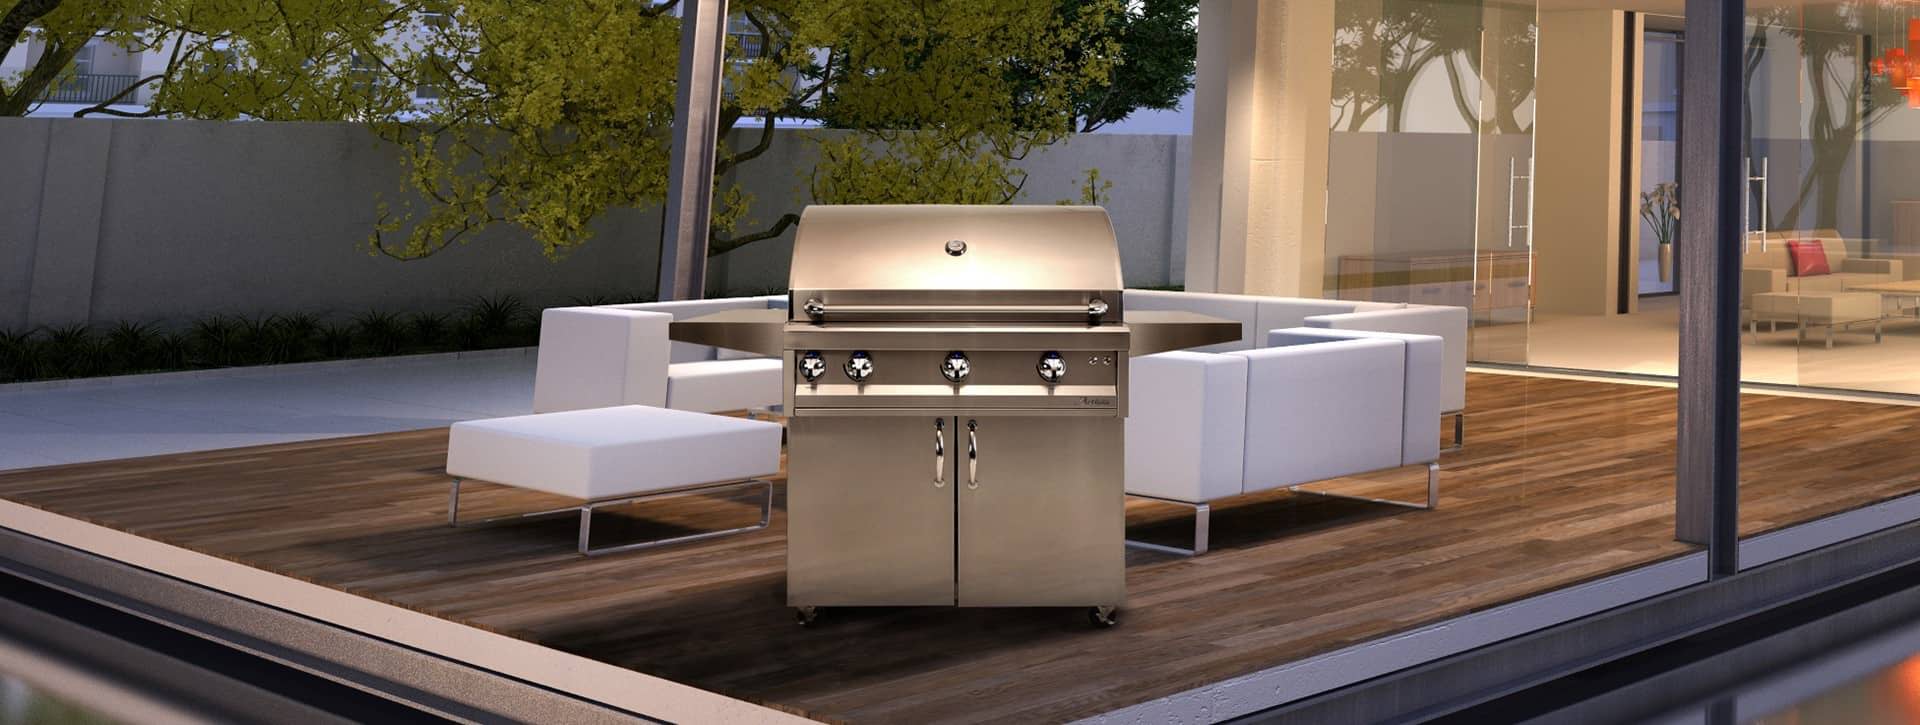 Grills Are Compared to Alfresco Grills